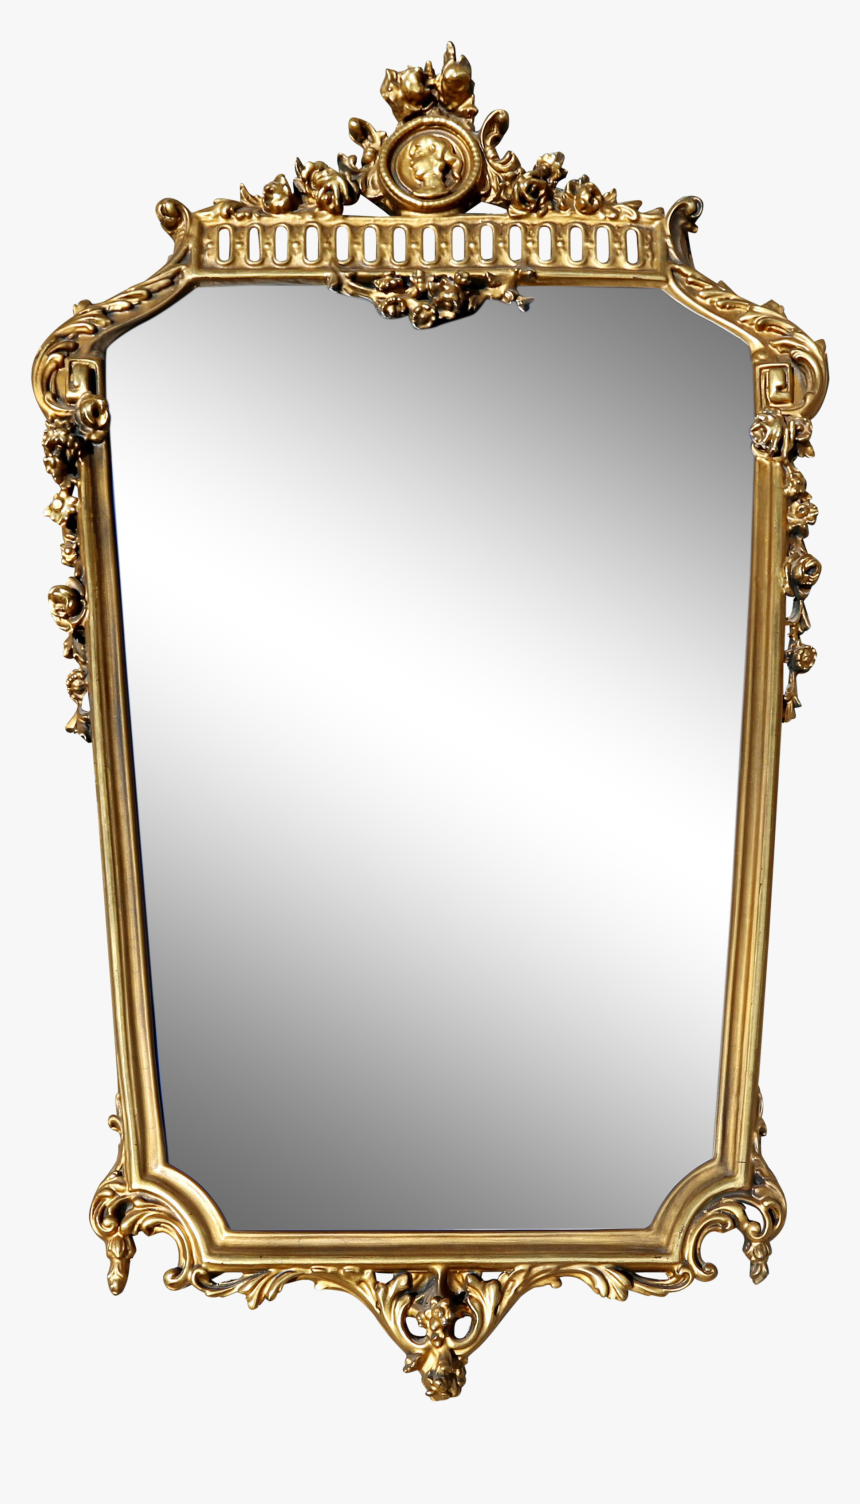 Gold Vintage Mirrors Png, Transparent Png, Free Download